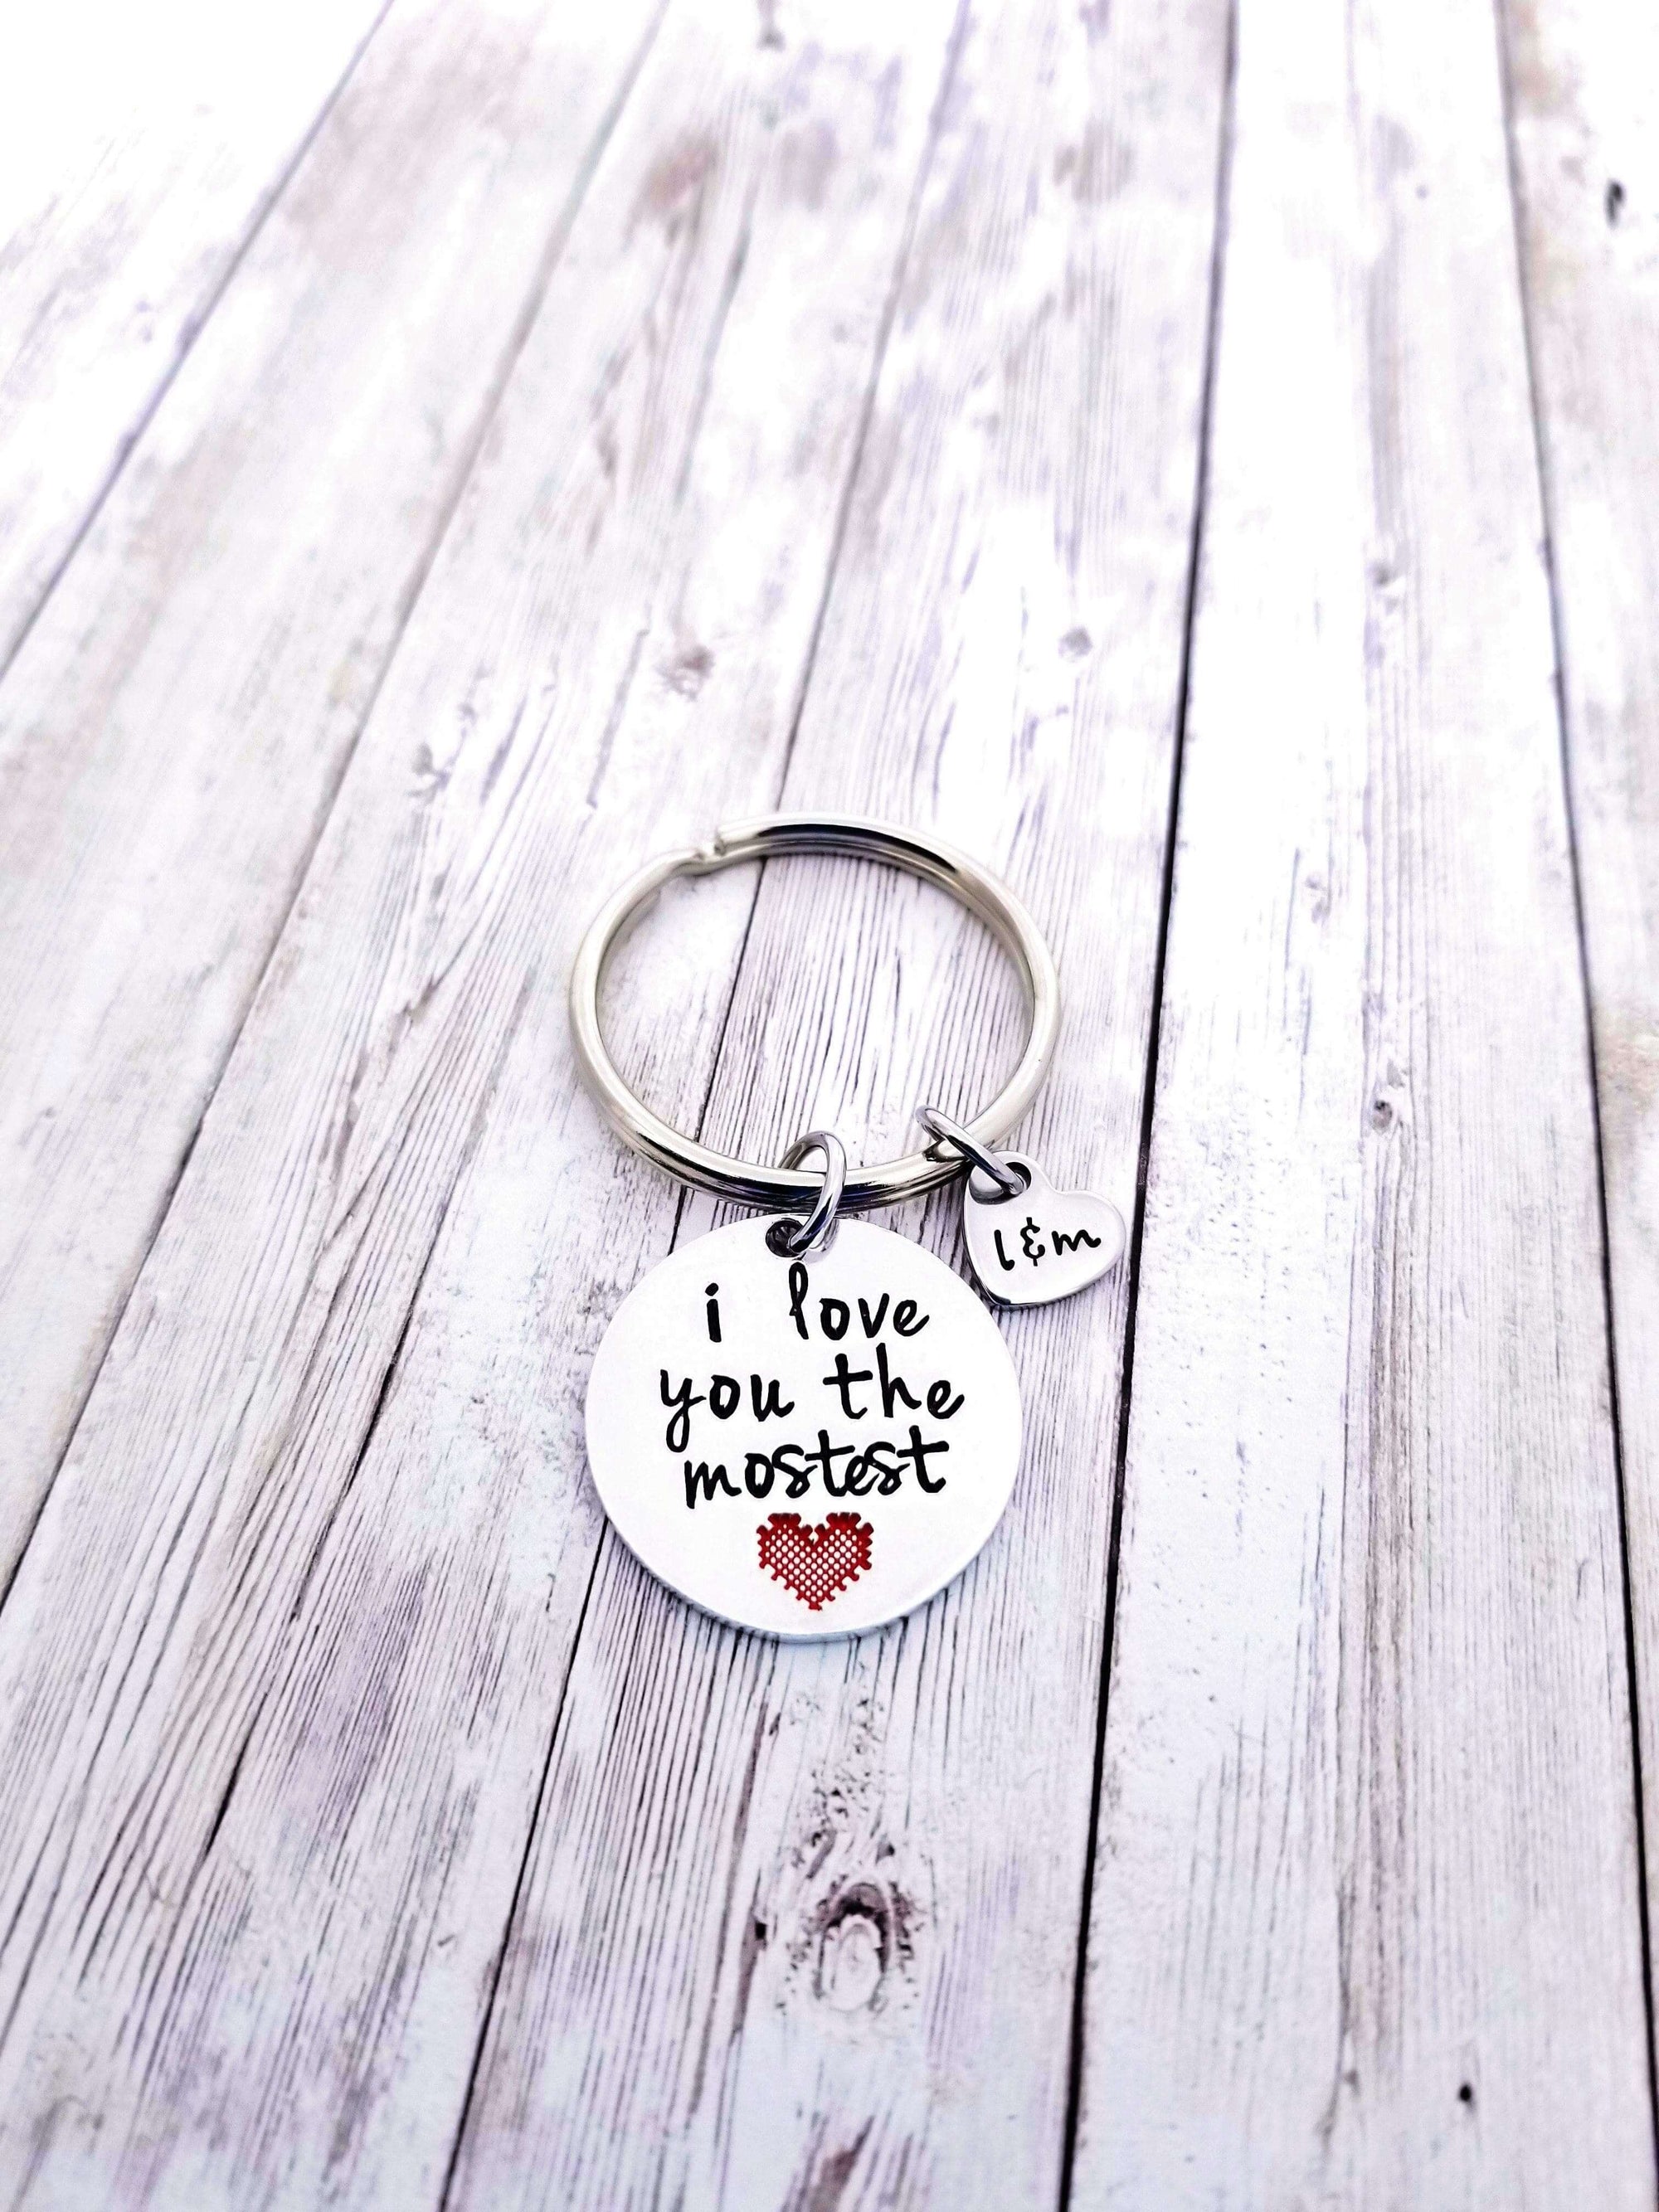 Be True To Yourself, Daughter Gift, Best Friend Gift, Inspirational Gift, Handstamped Gift, Custom Gift, Personal Gift, Gift of love